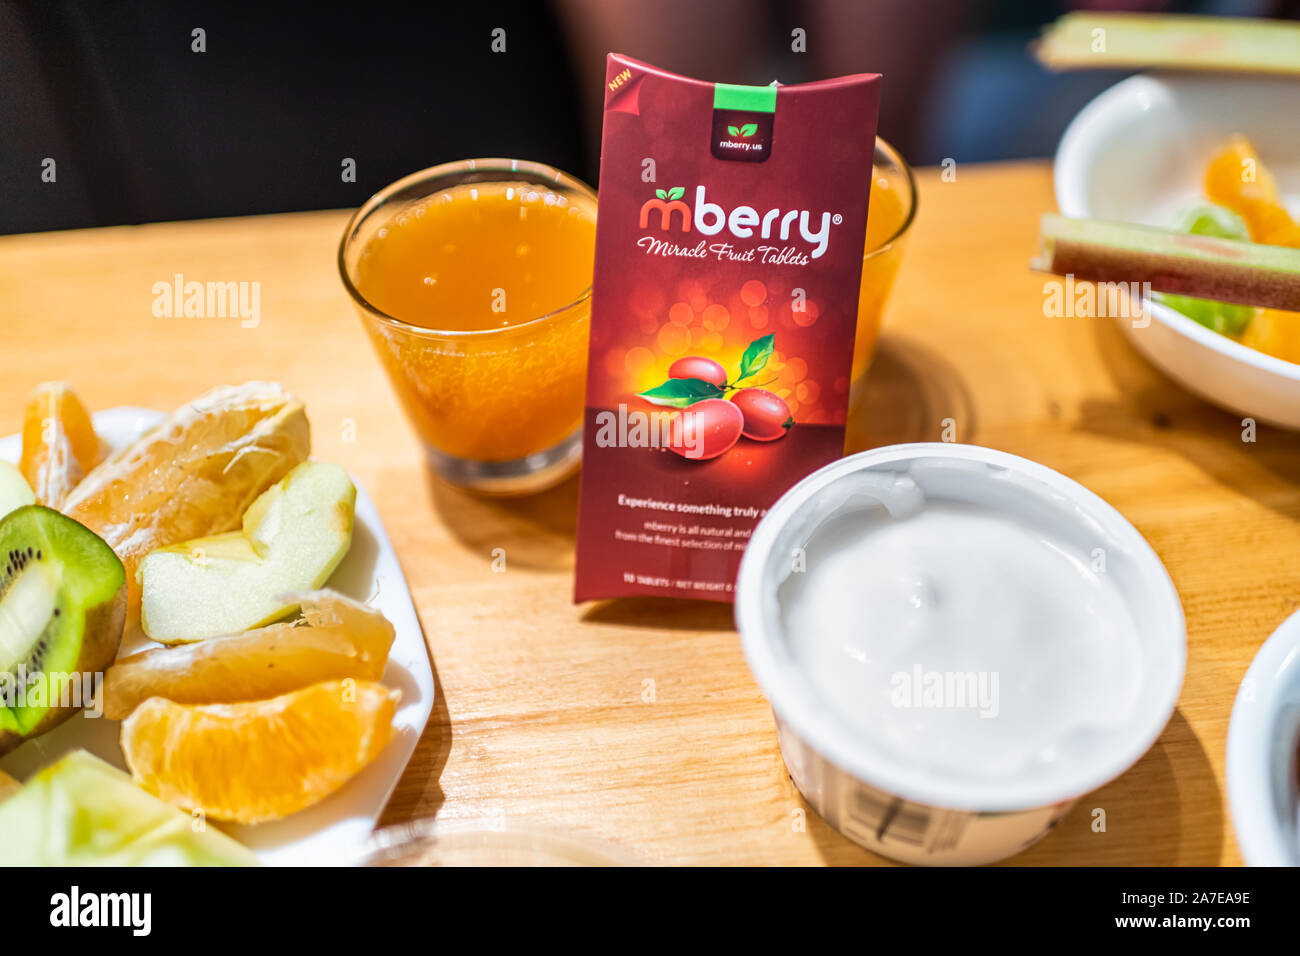 Durango, USA - September 2, 2019: Sign of mberry miracle berry package ledidi Synsepalum dulcificum berry that turns sour foods sweet with orange slic Stock Photo